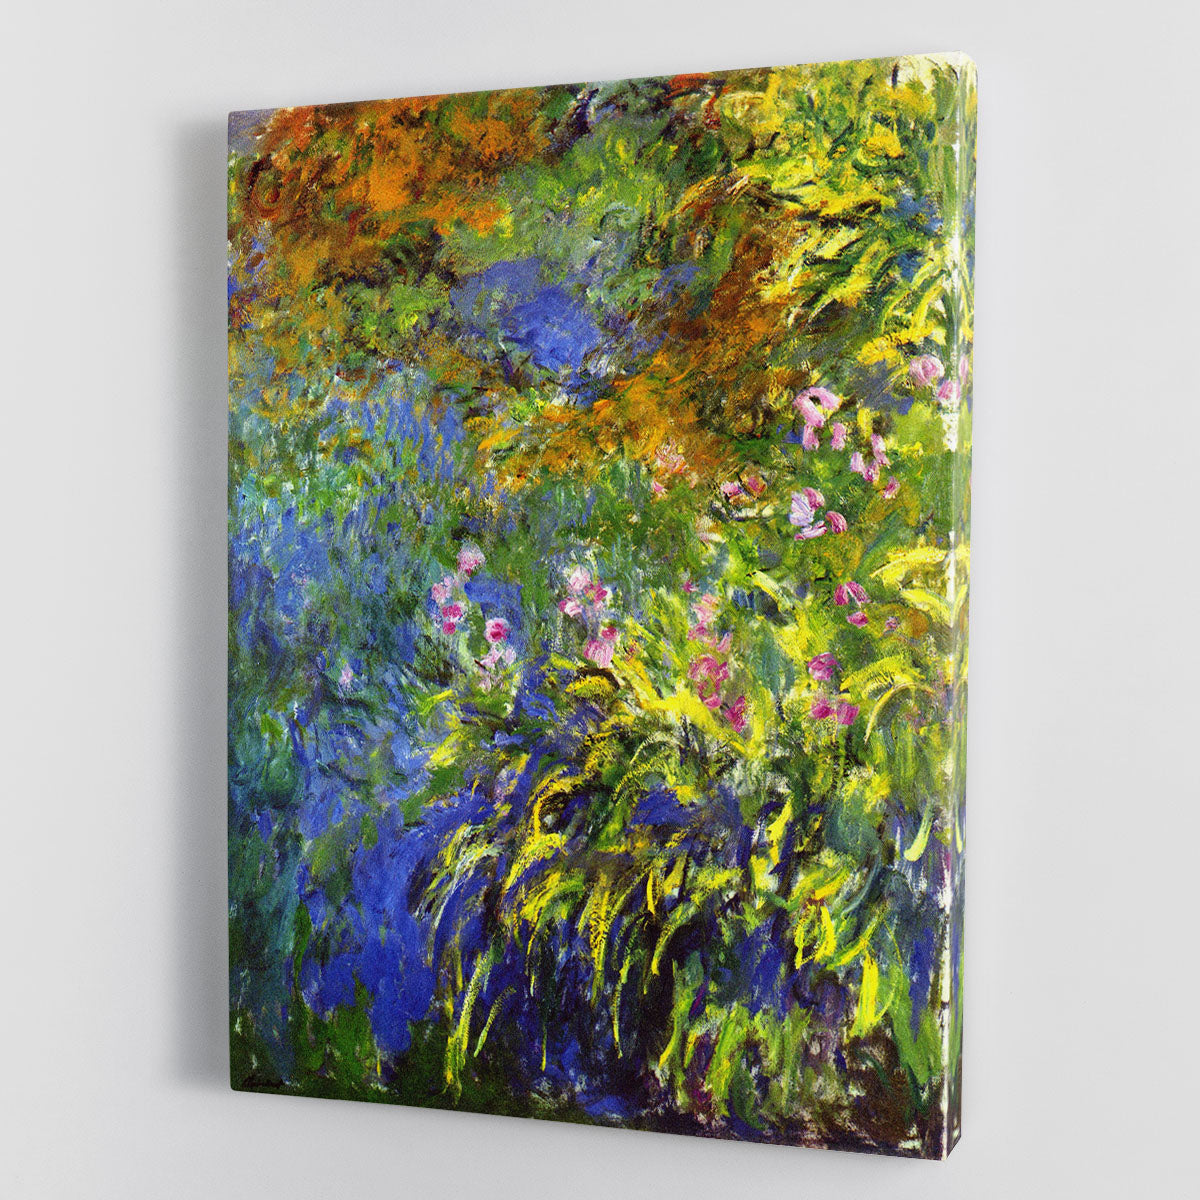 Iris at the sea rose pond 2 by Monet Canvas Print or Poster - Canvas Art Rocks - 1